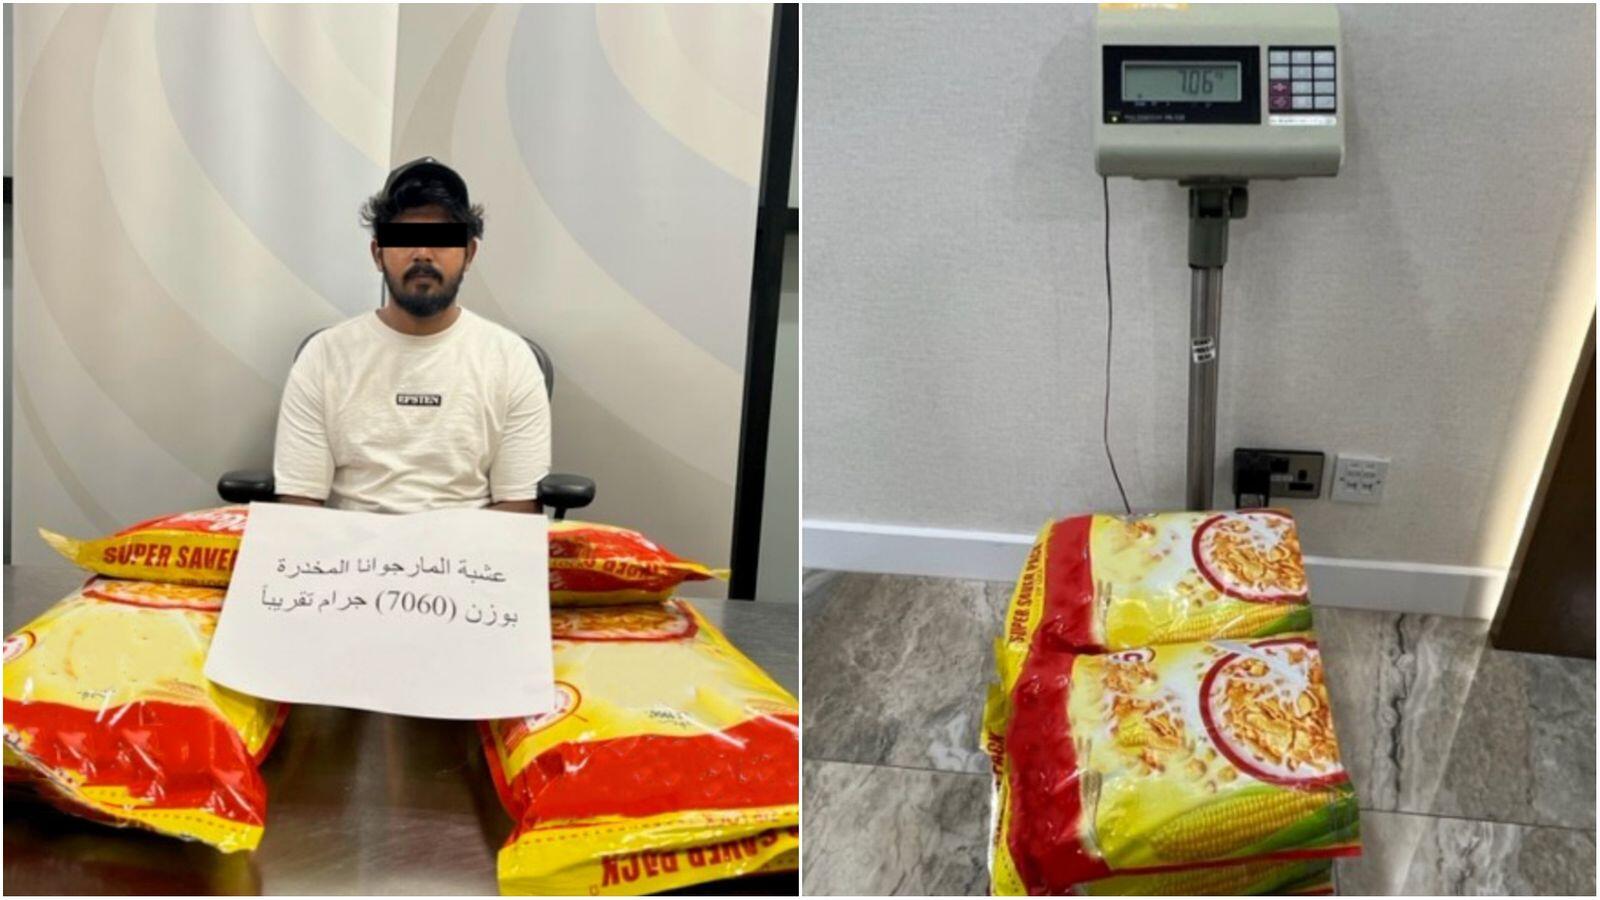 Dubai: Man hides 7kg drugs in cereal boxes, busted at airport - News